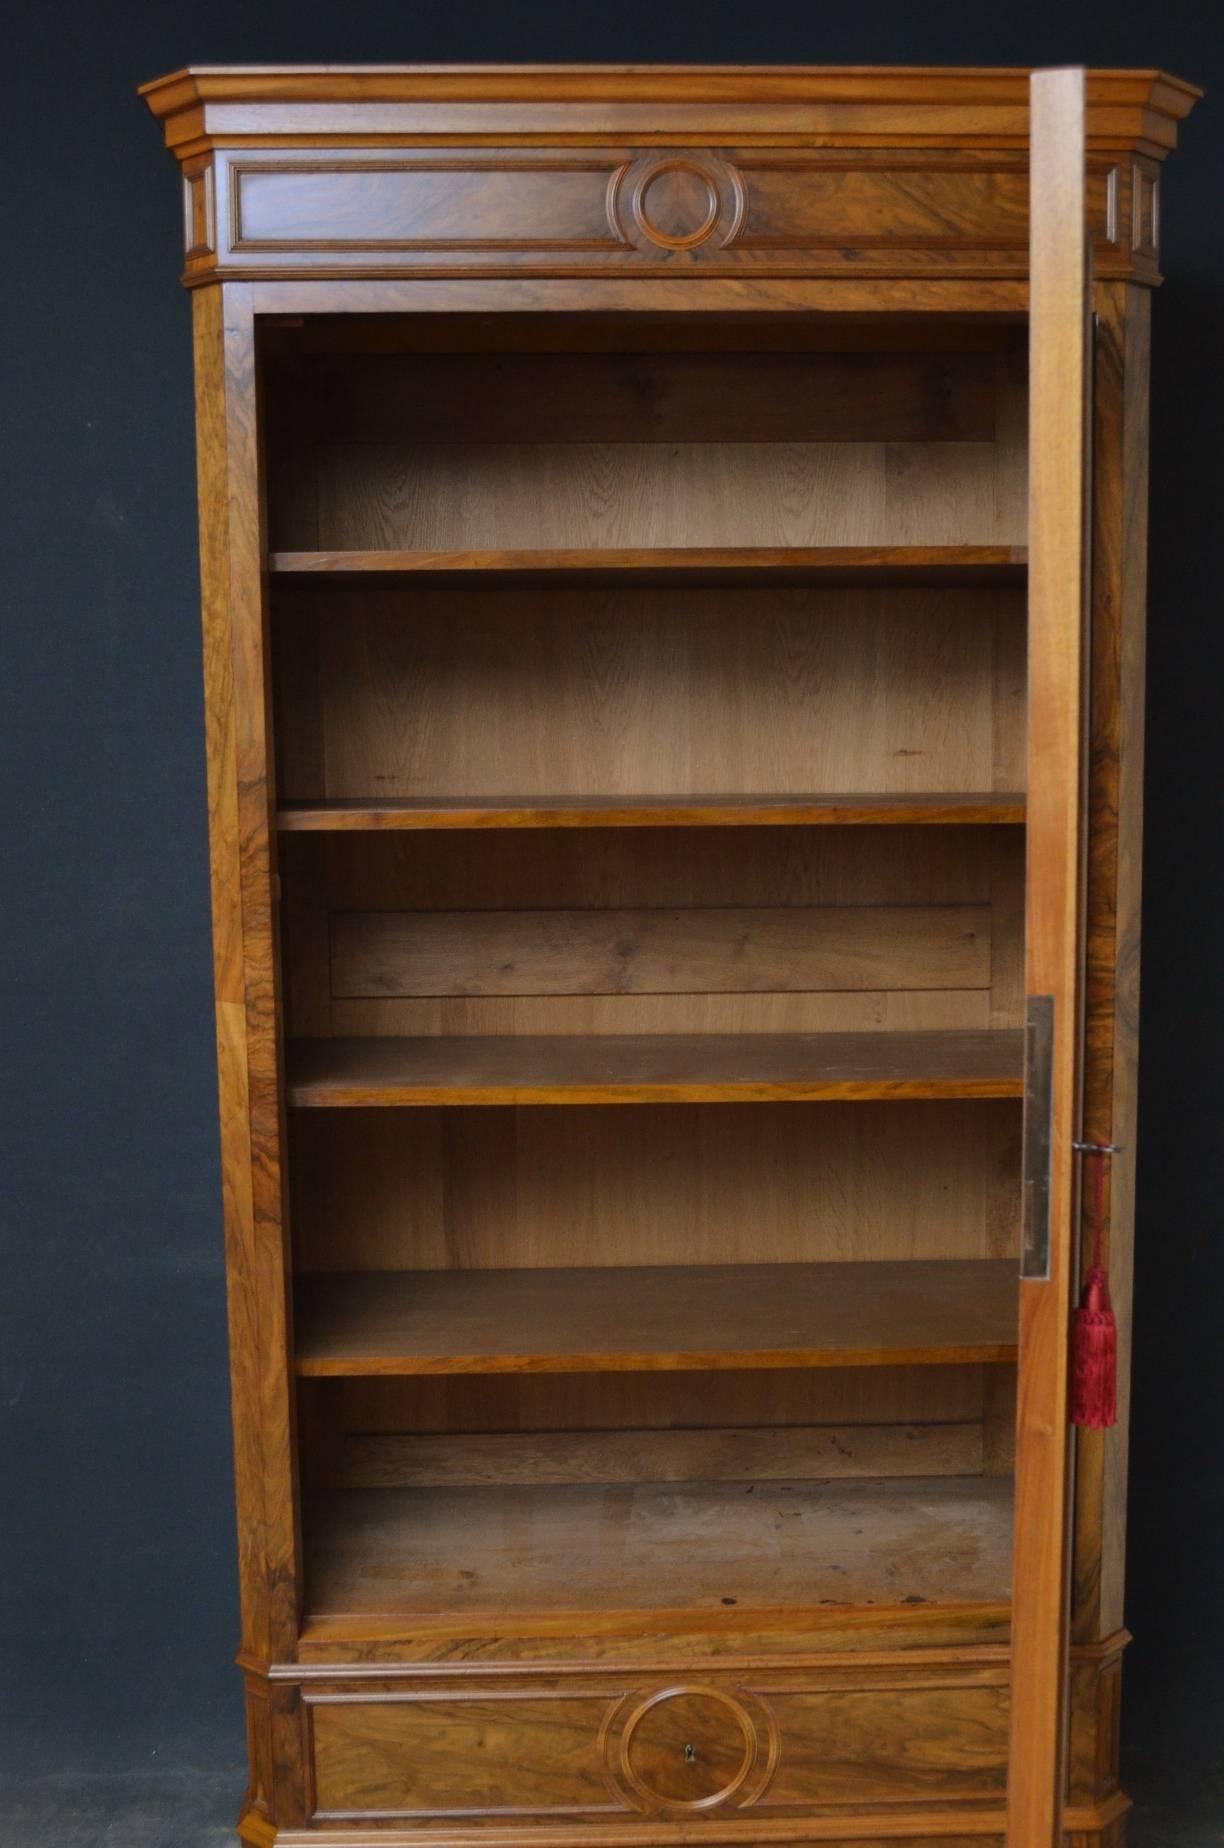 Sn4079 Very attractive figured walnut bookcase, having out swept, moulded cornice and single glazed door enclosing four height adjustable shelves above two oak lined drawer, all standing on plinth base and pad feet. This fine bookcase is in